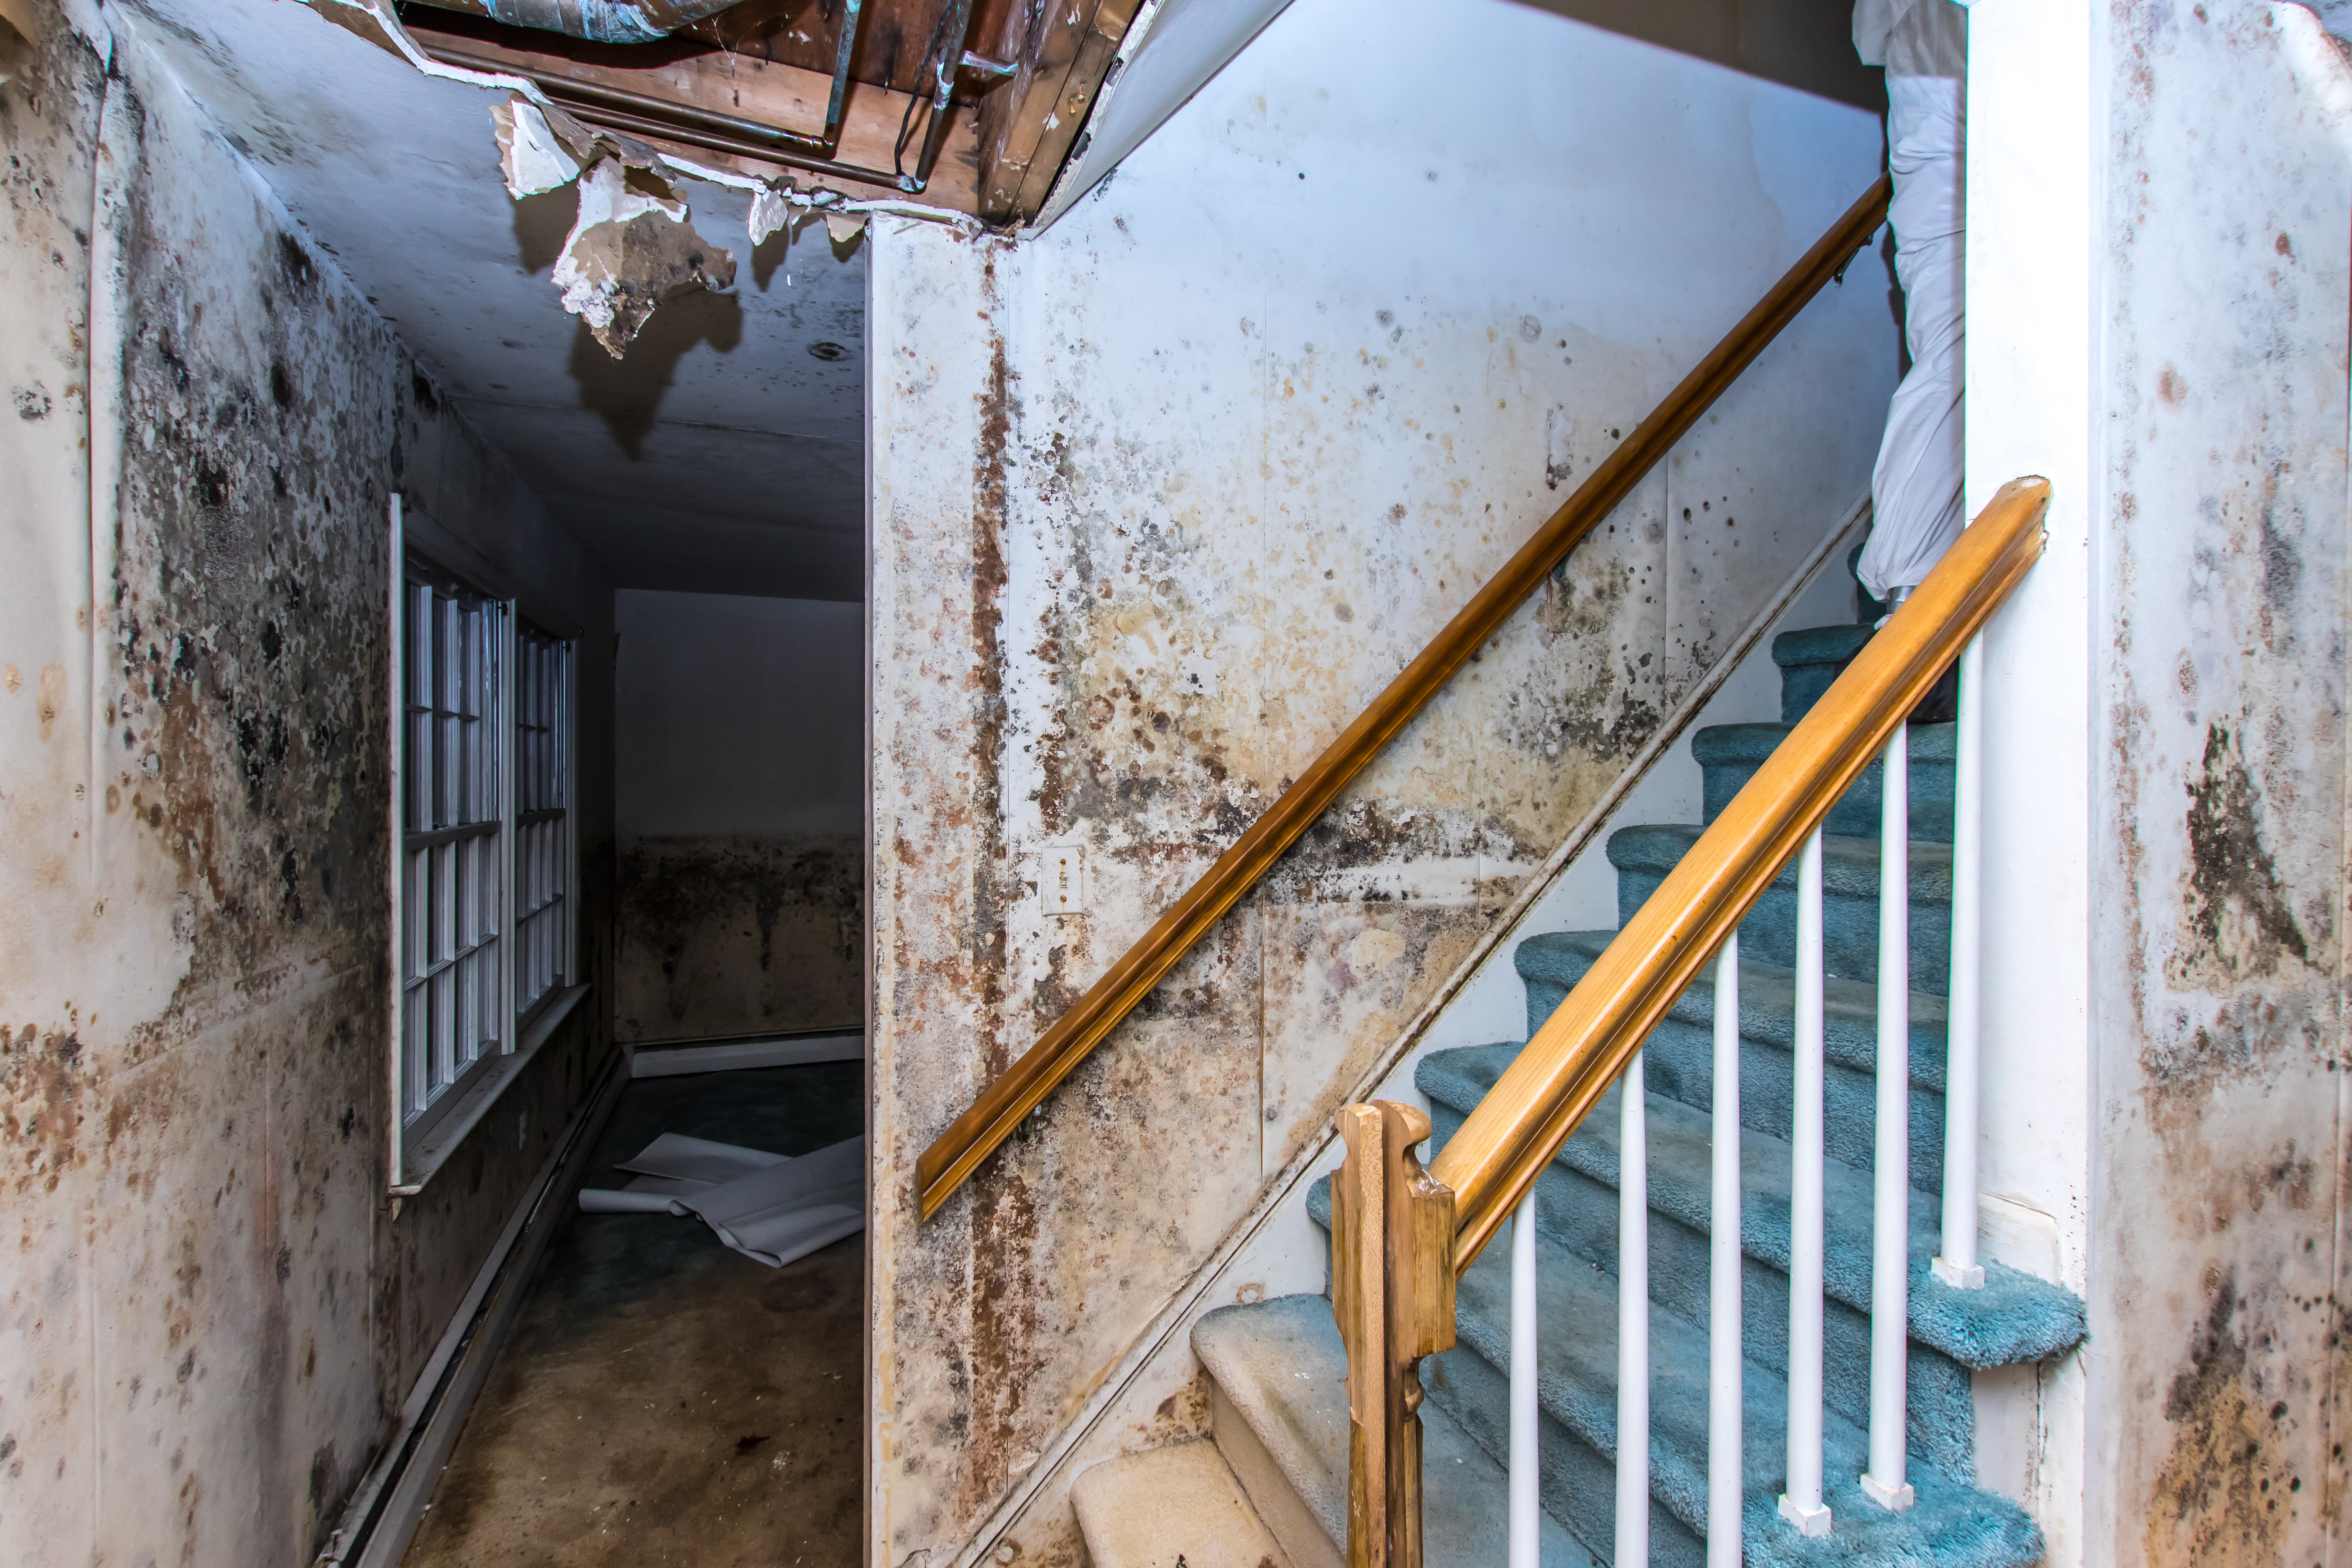 Three Common Causes of Toxic Building Mold